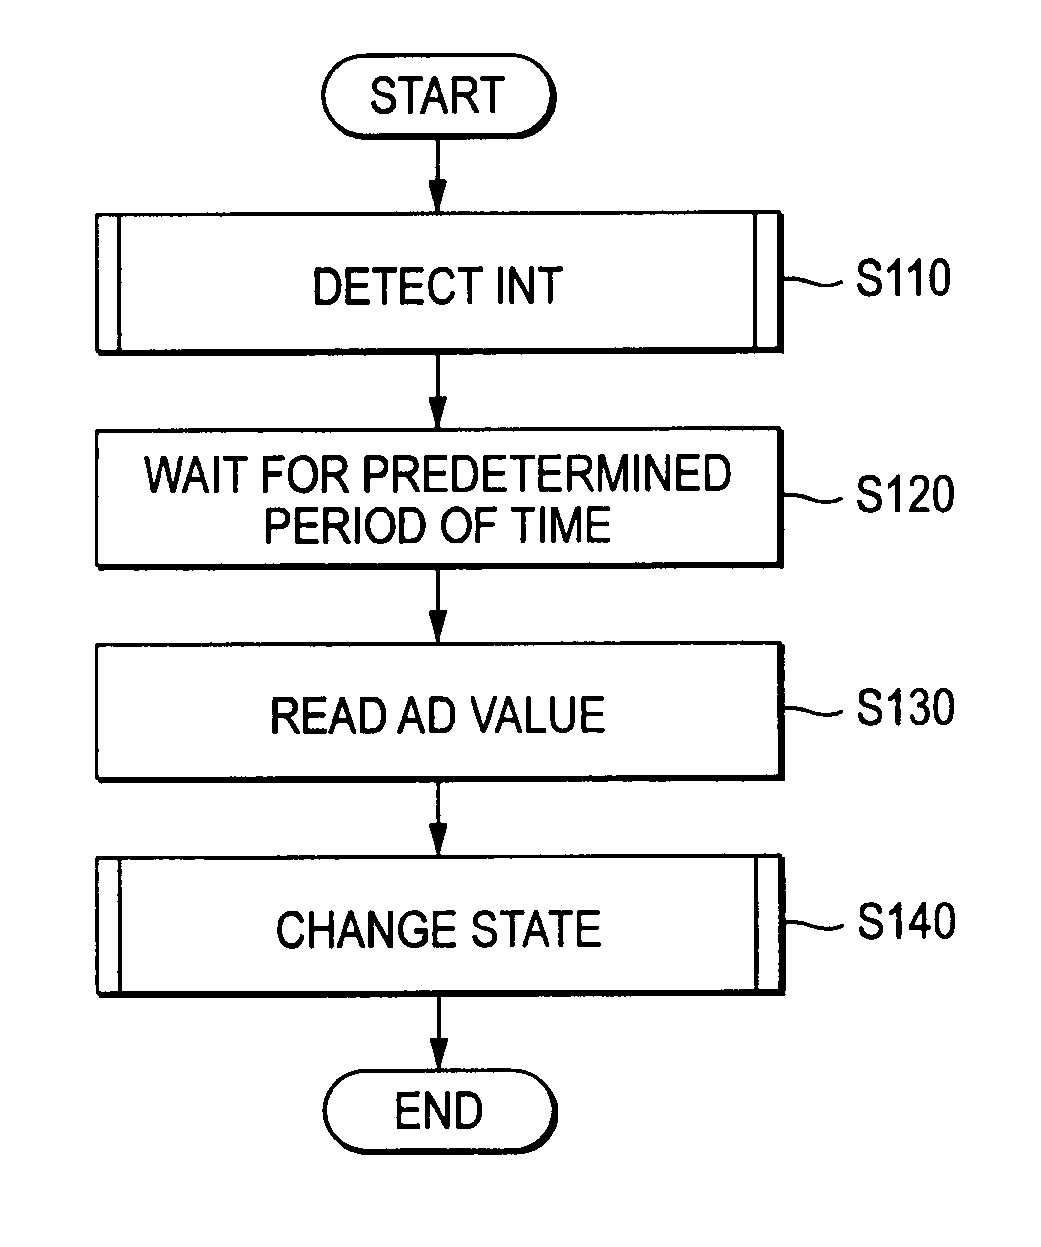 Electronic machine, connected machine identifying method for electronic machine and control system